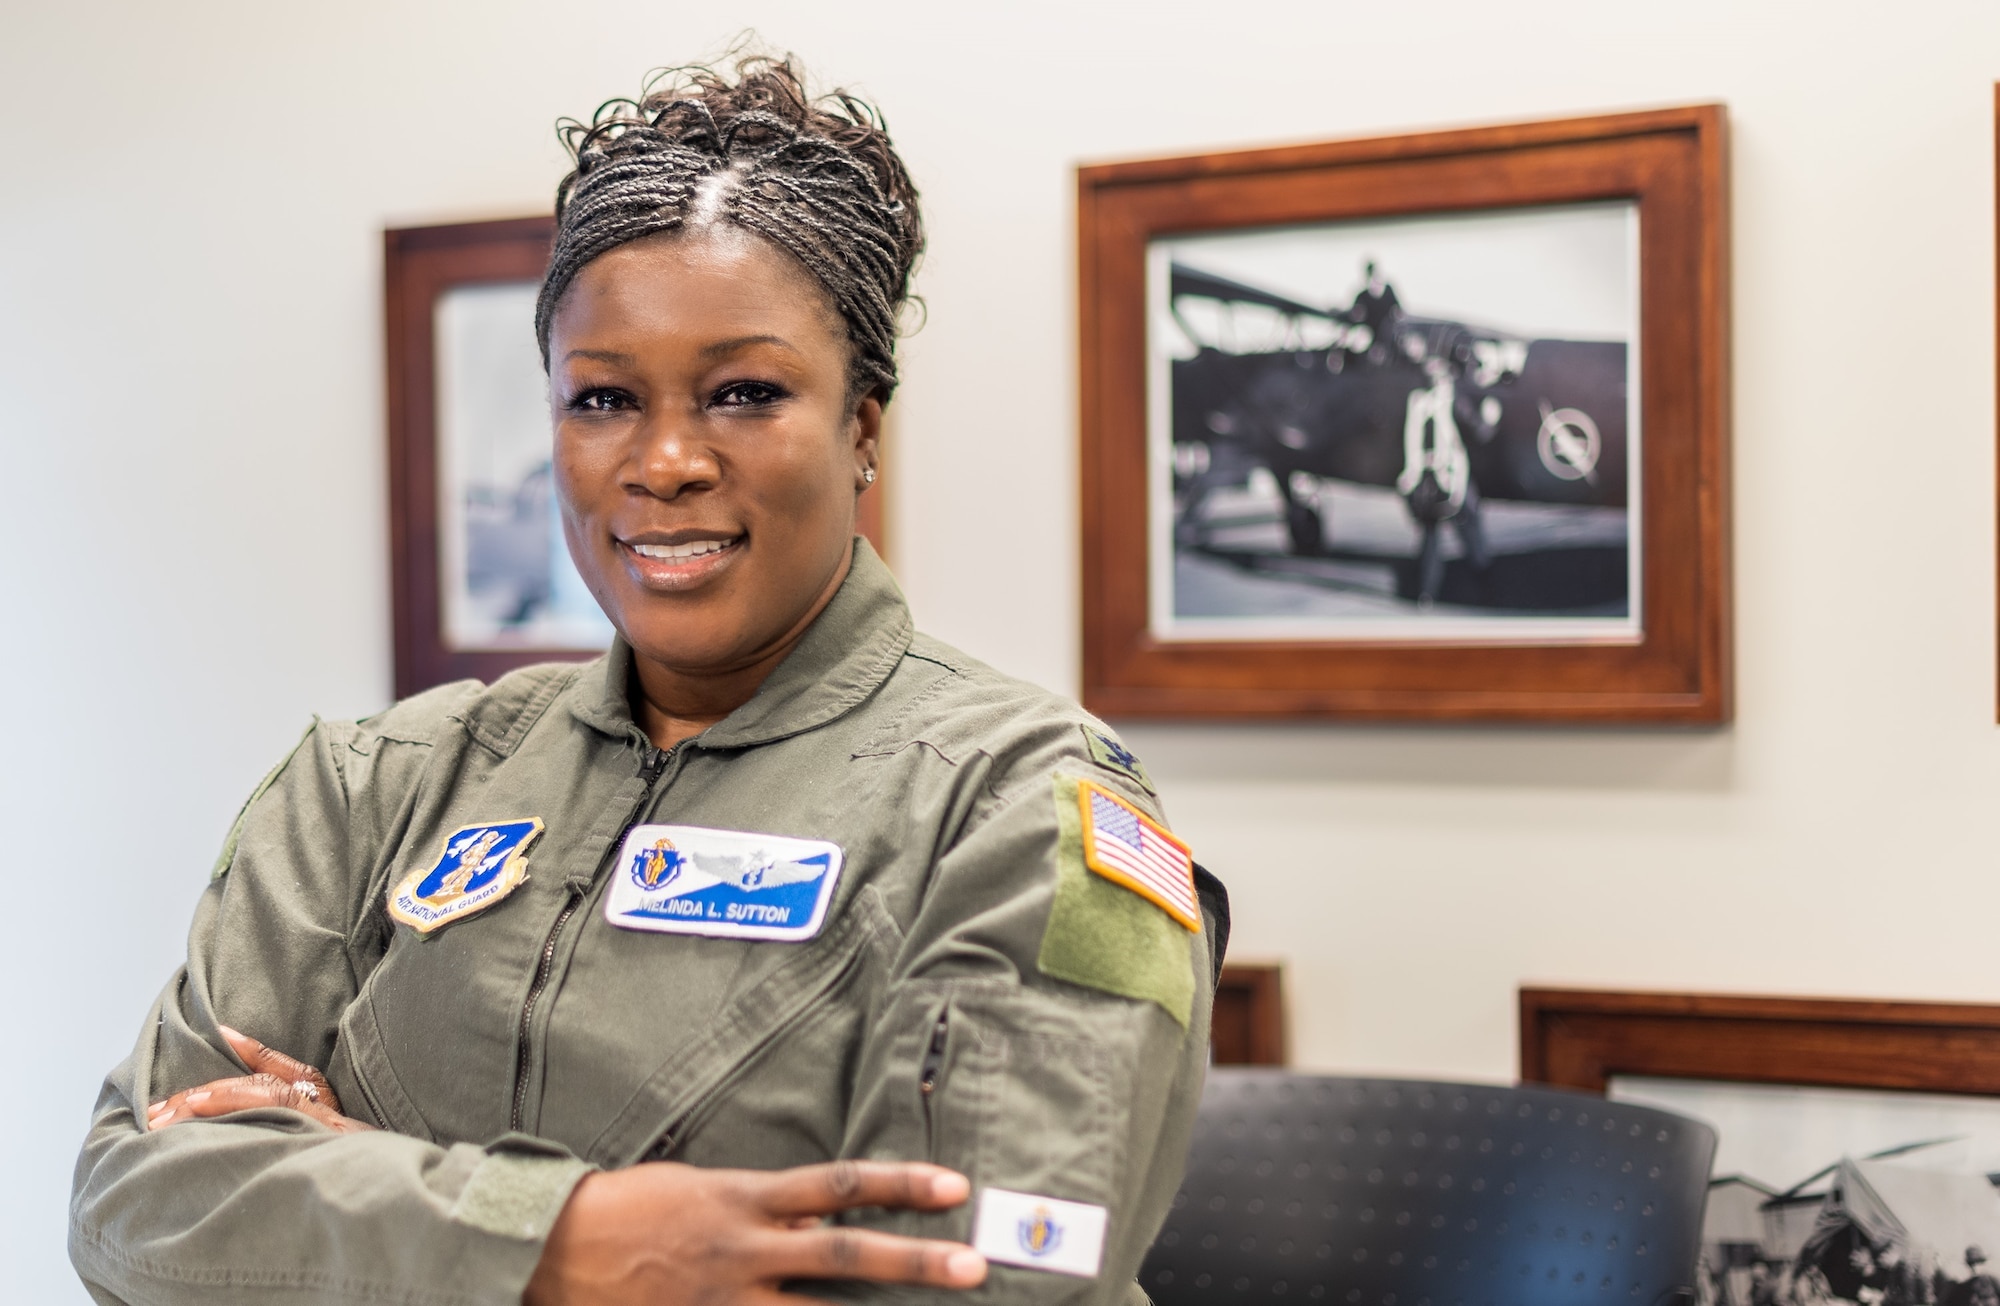 Colonel Melinda Sutton, who serves as the 102nd Intelligence Wing’s Chief of Aerospace Medicine, was recently selected as the National Guard BEYA Stripes and Stars Award winner for 2022.